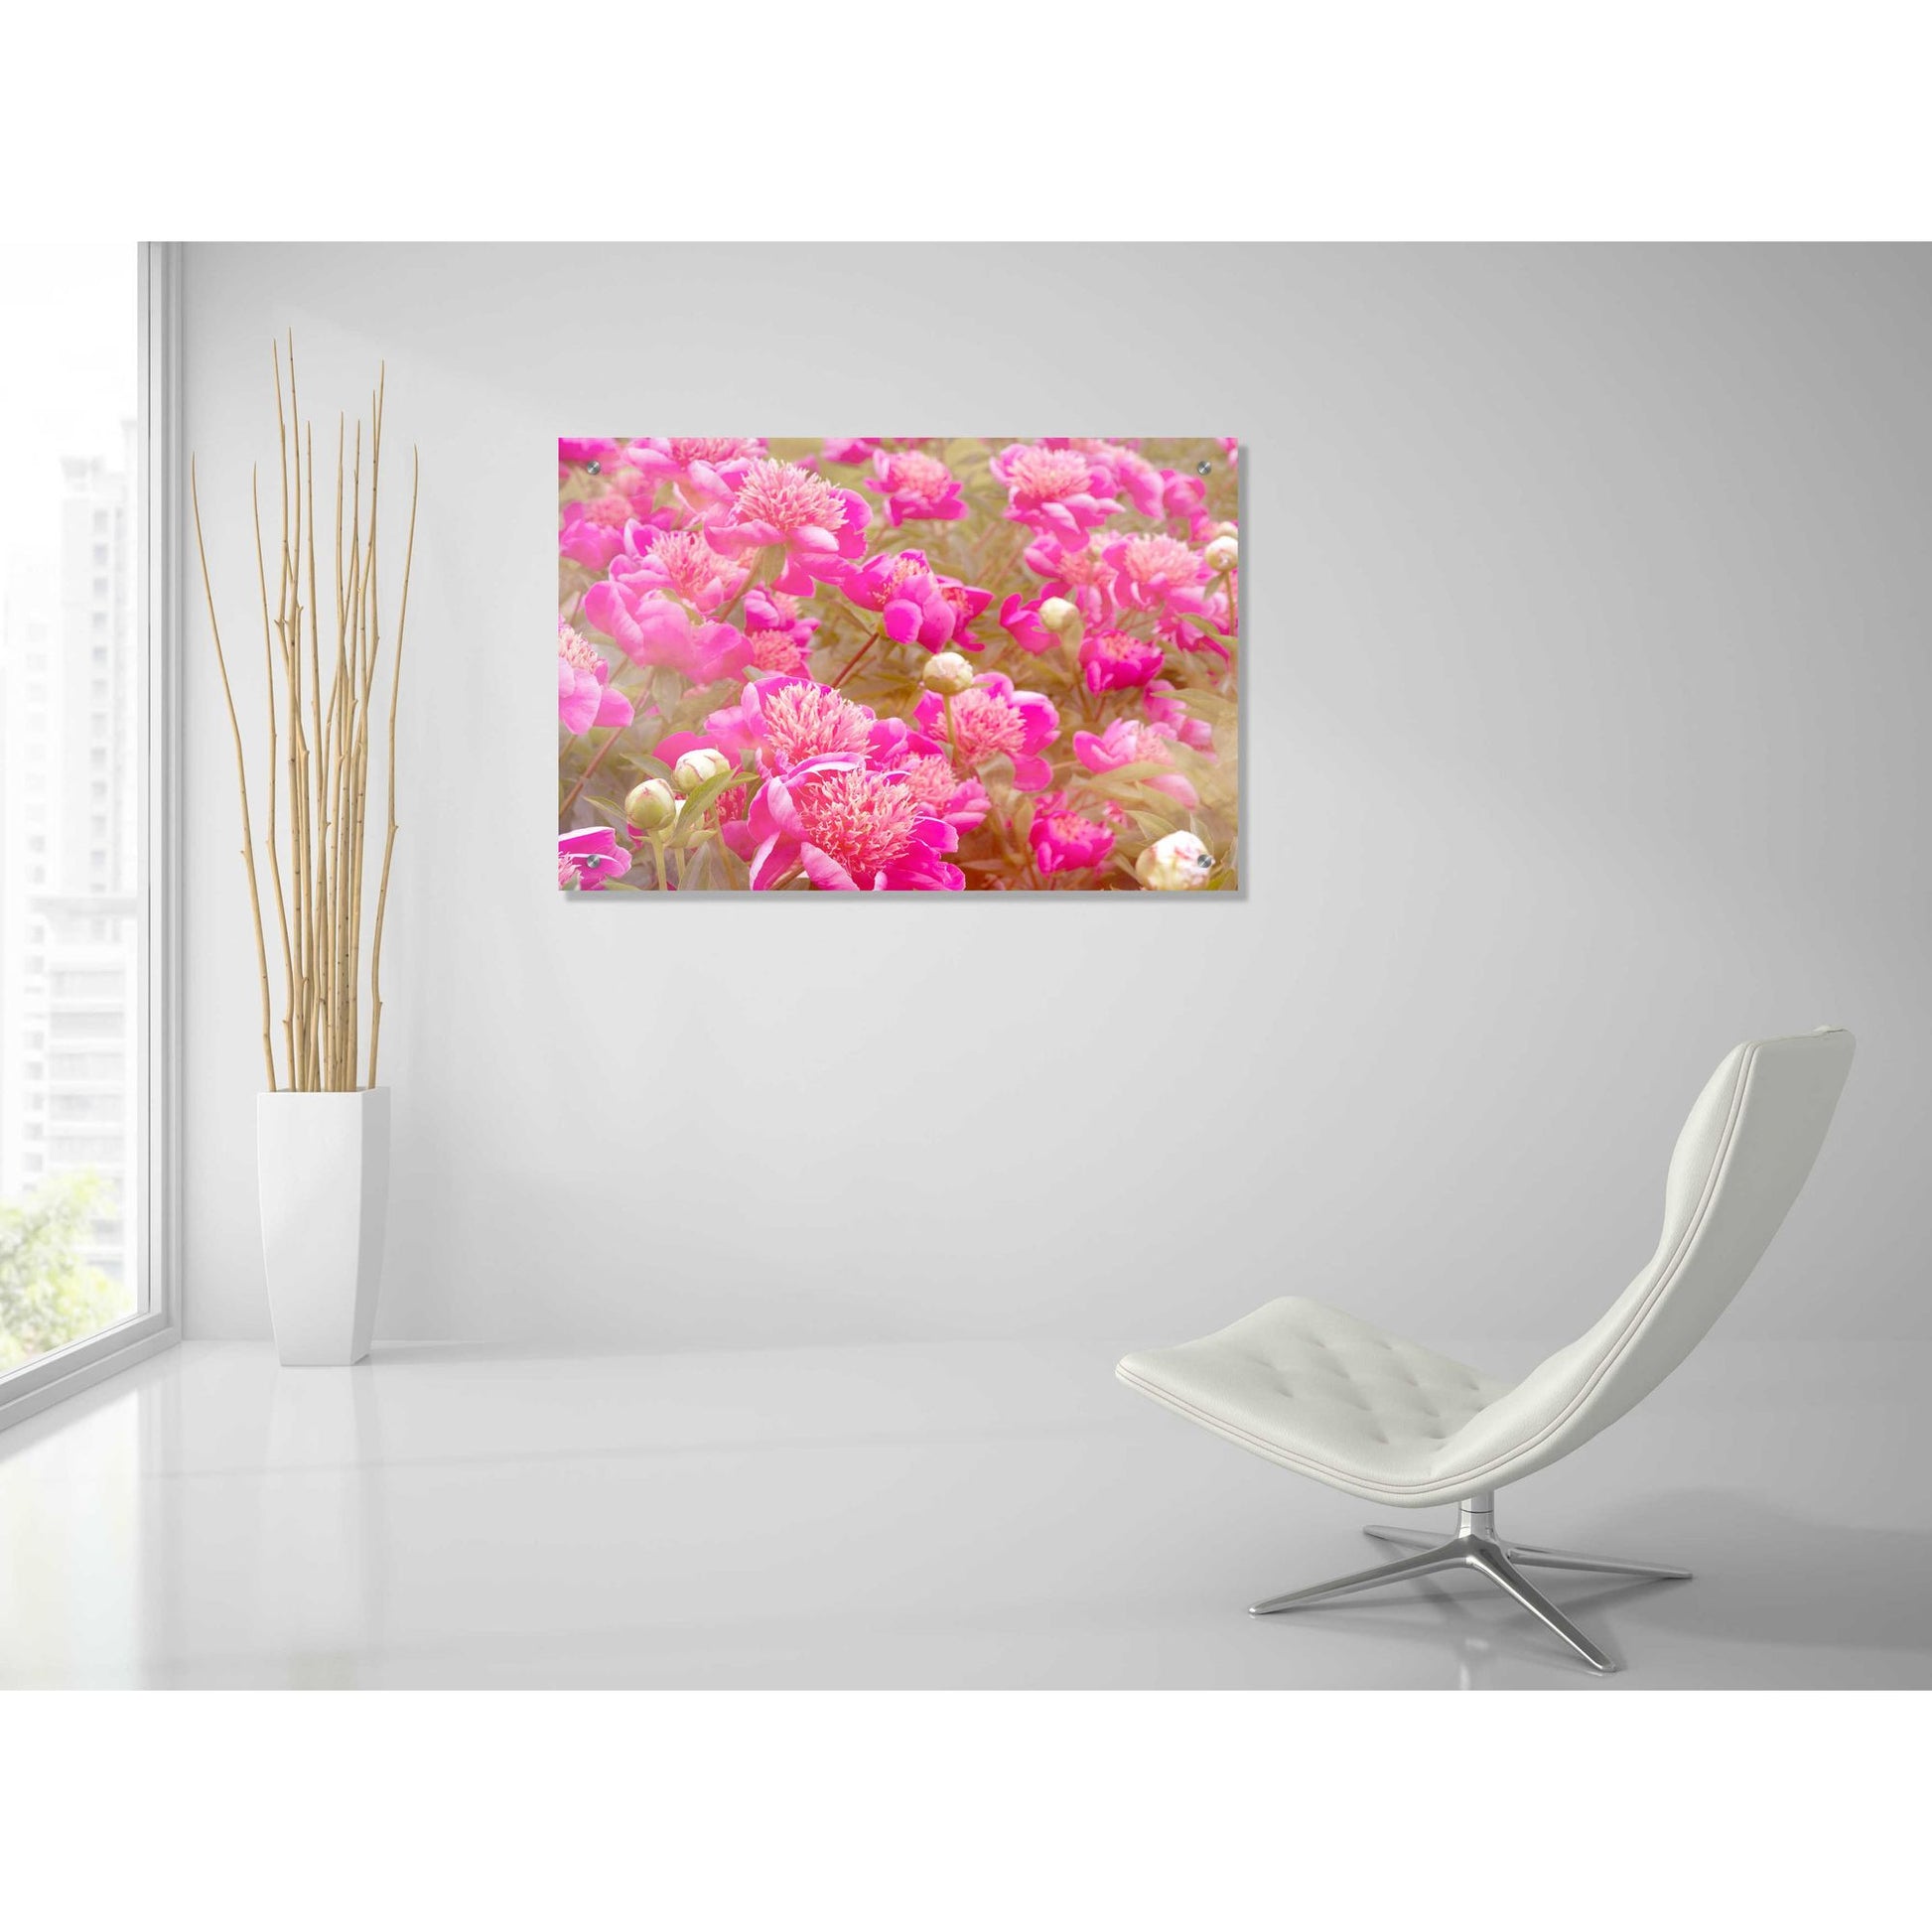 Epic Art 'Pinks' by Dennis Frates, Acrylic Glass Wall Art,36x24